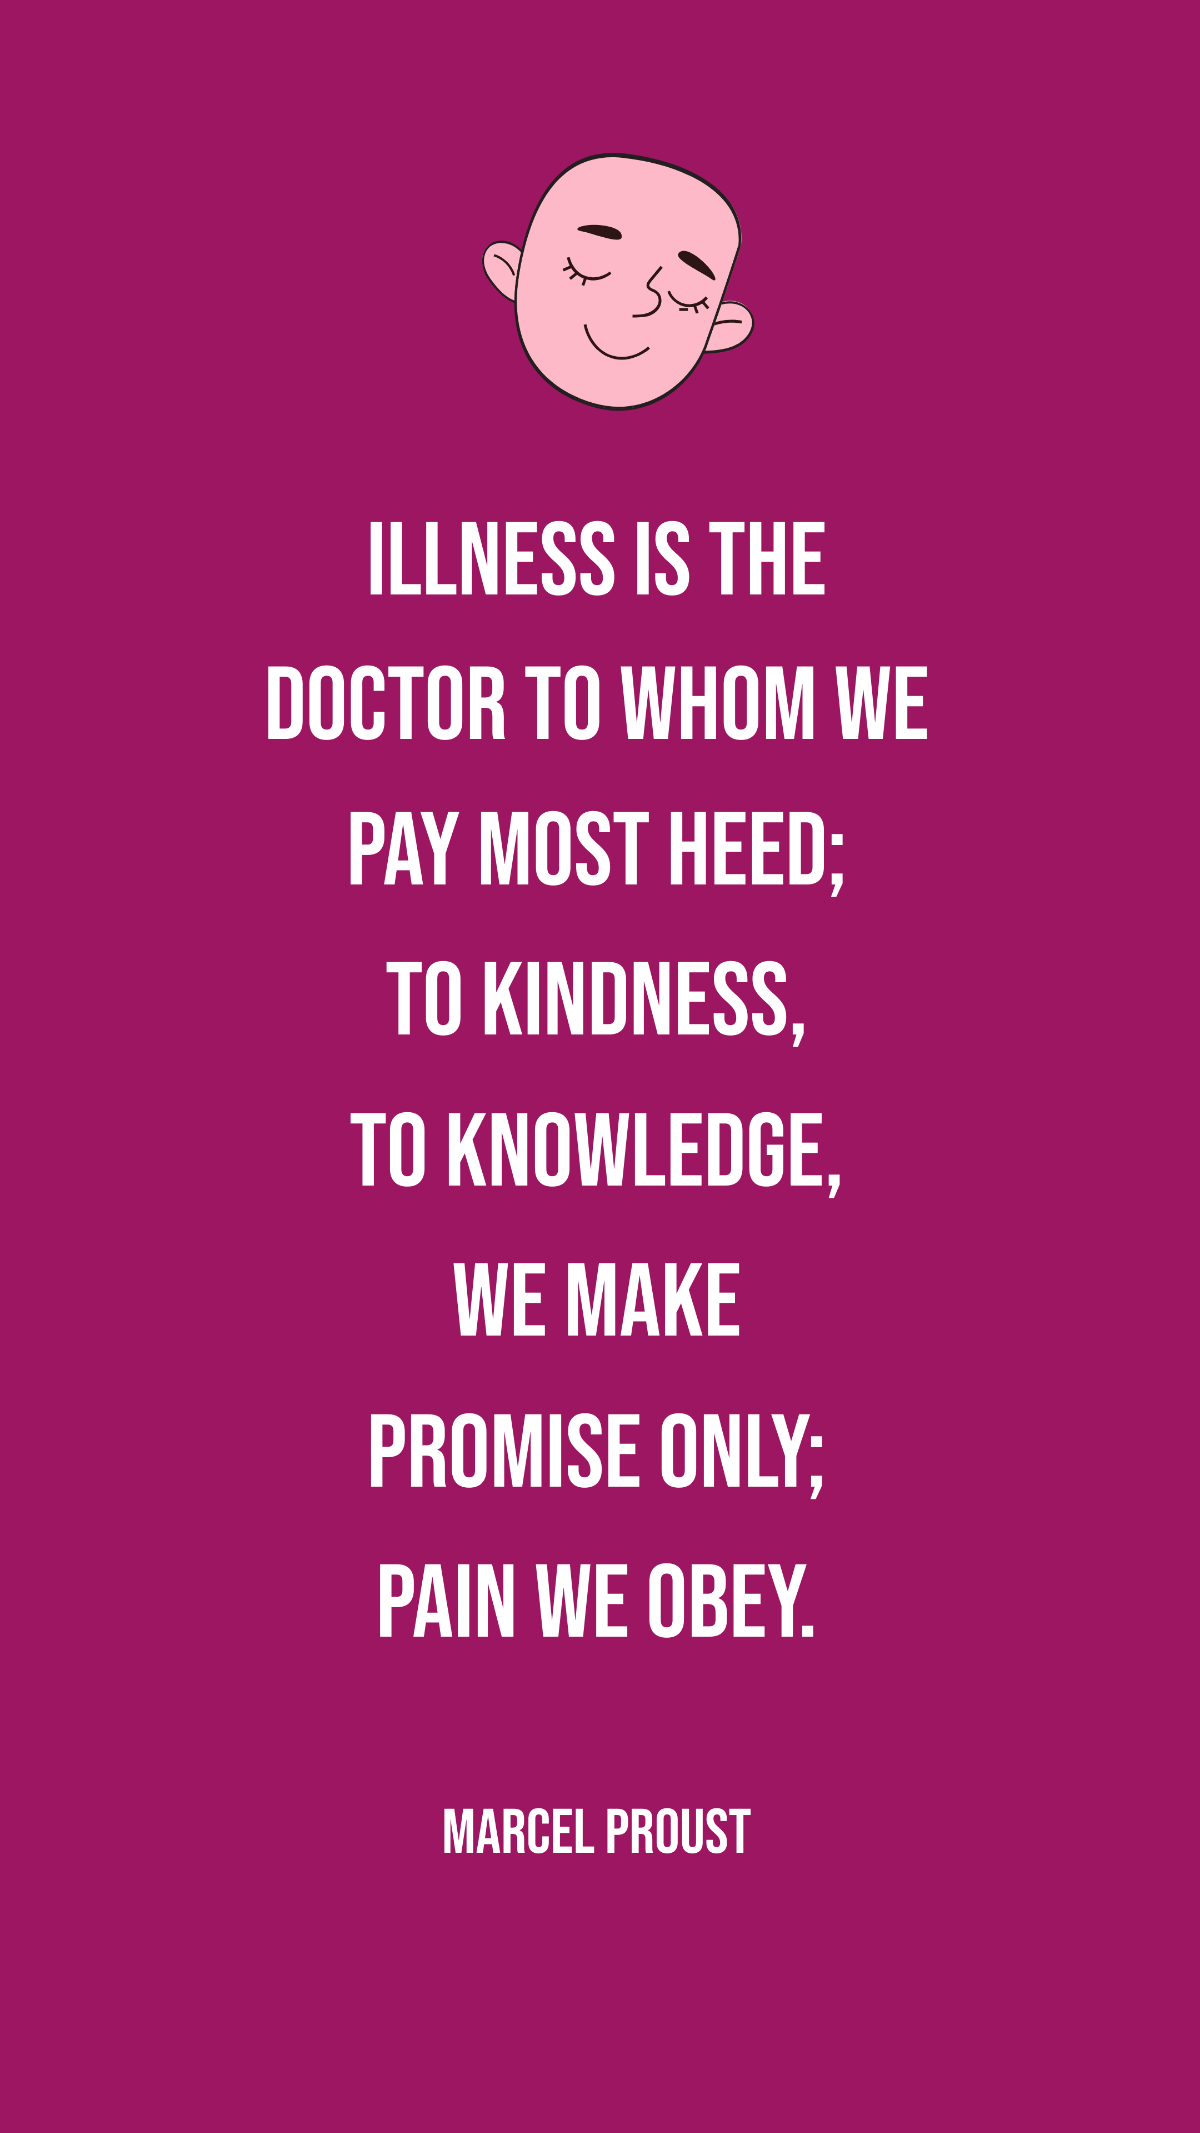 Marcel Proust - Illness is the doctor to whom we pay most heed; to kindness, to knowledge, we make promise only; pain we obey.